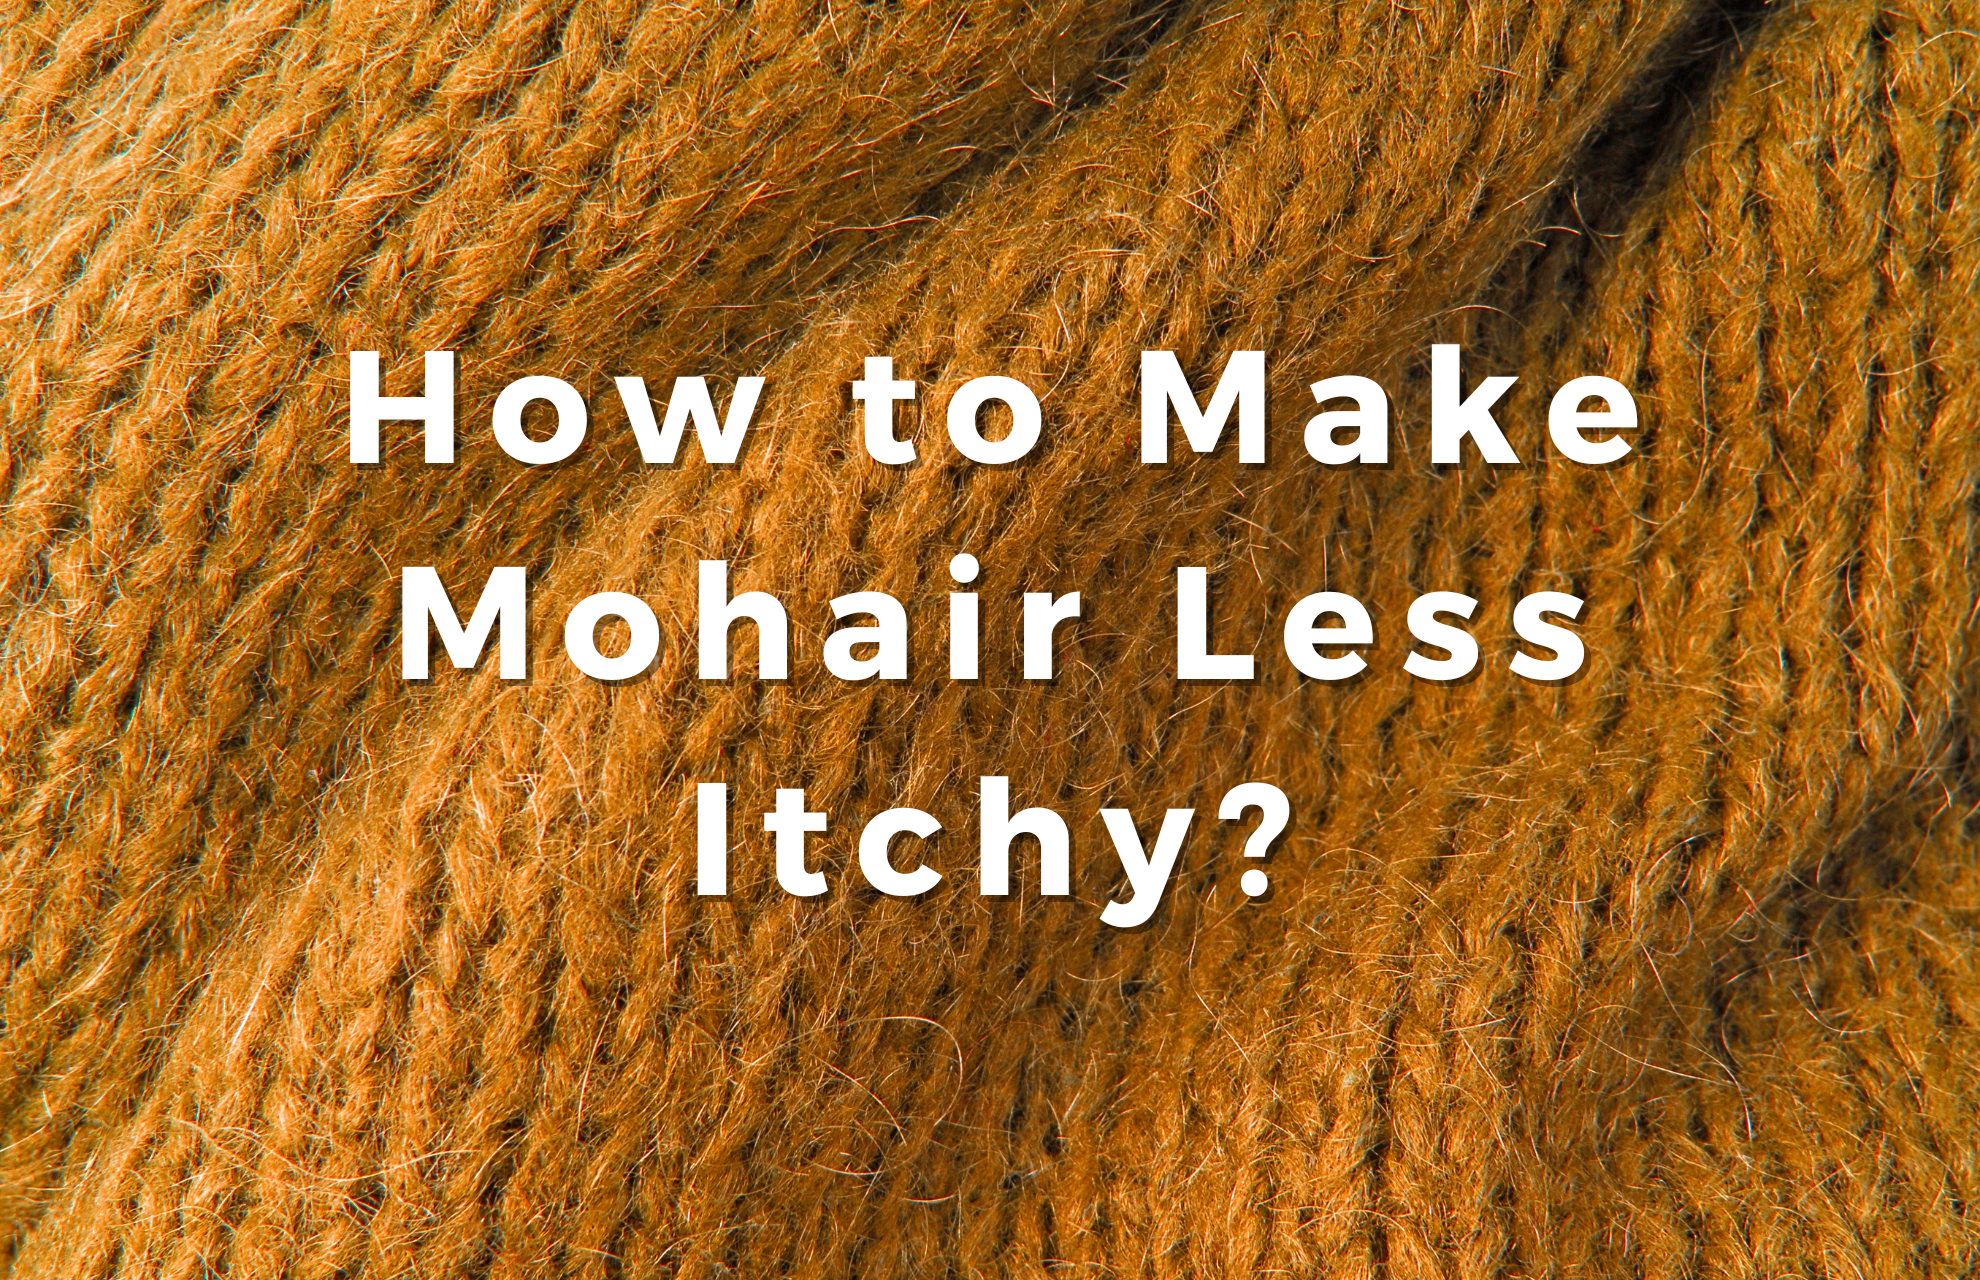 How to Make Mohair Less Itchy? 9 Useful Ways You Can Try